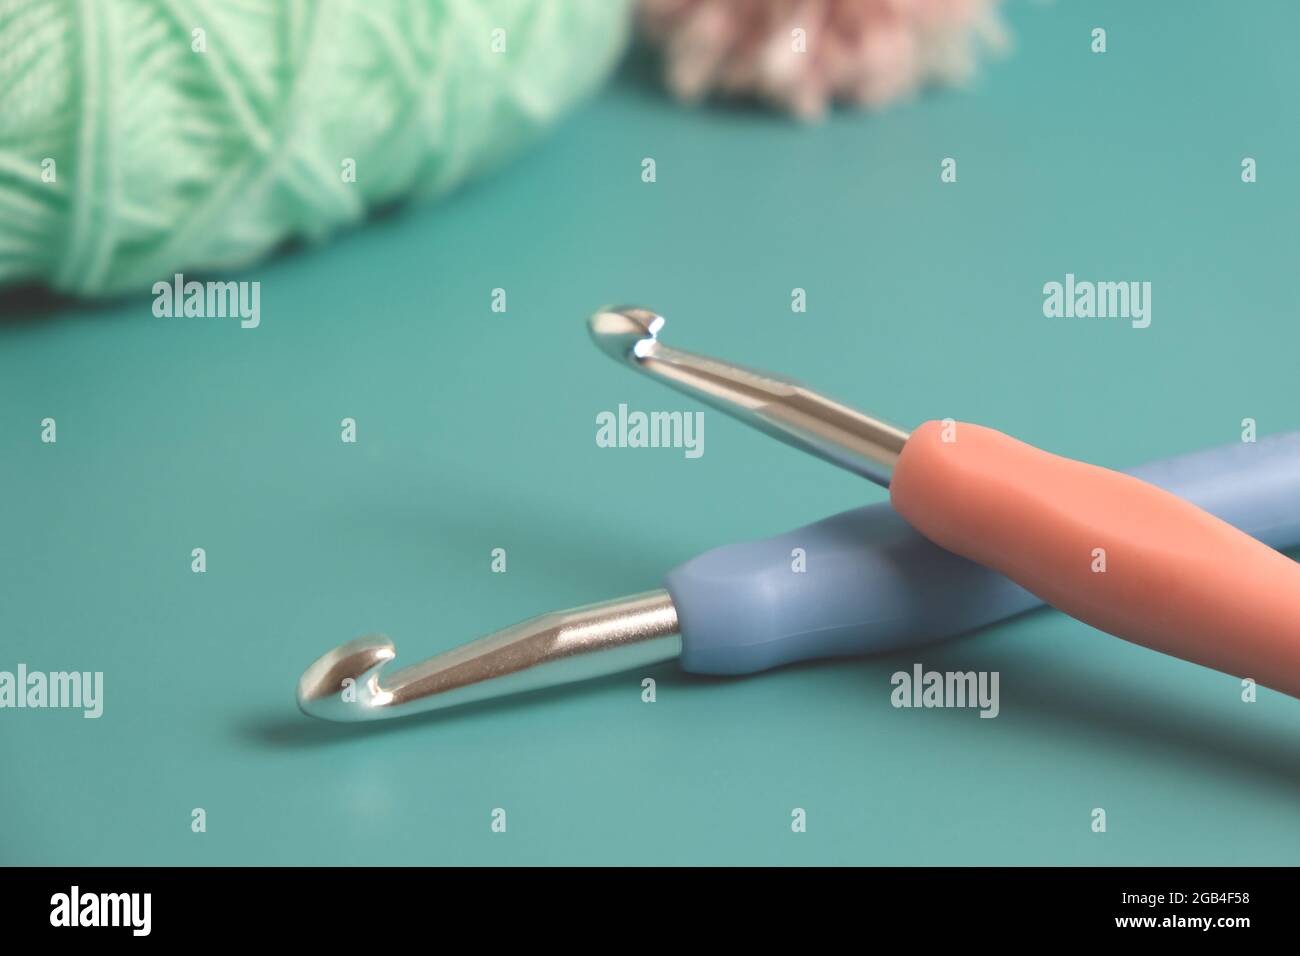 two knitting multicolored crochet hooks on a blue background Stock Photo